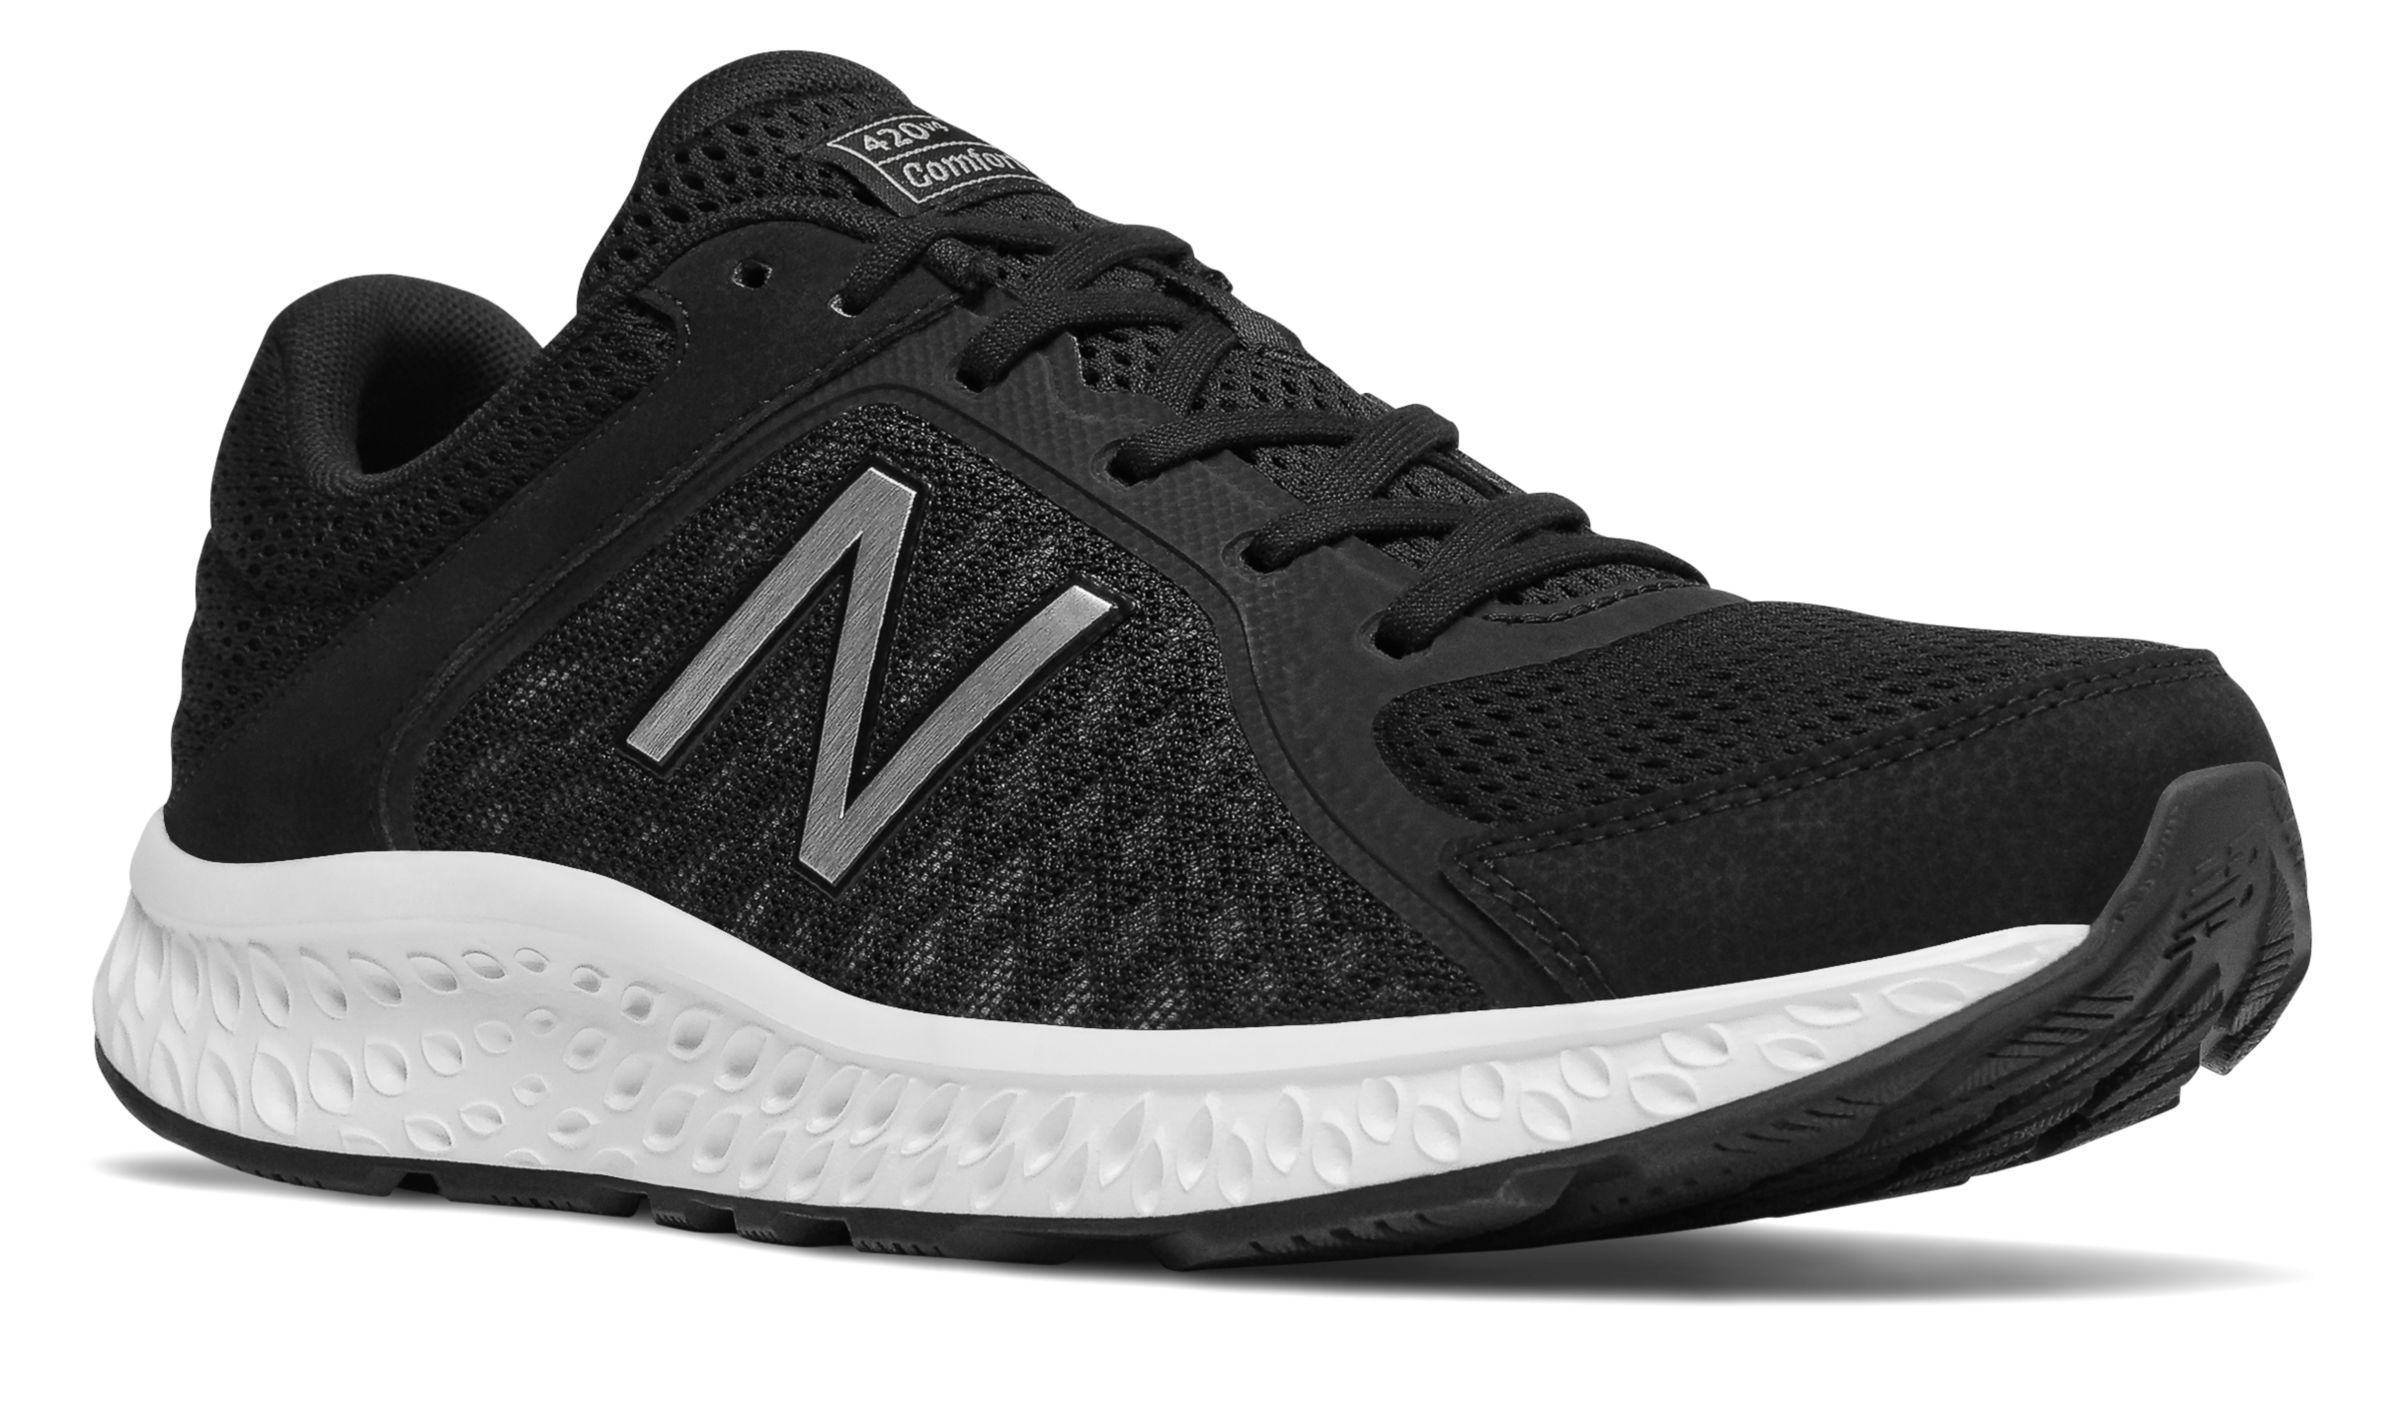 New Balance M420-V4 on Sale - Discounts Up to 30% Off on M420LK4 at Joe's New  Balance Outlet